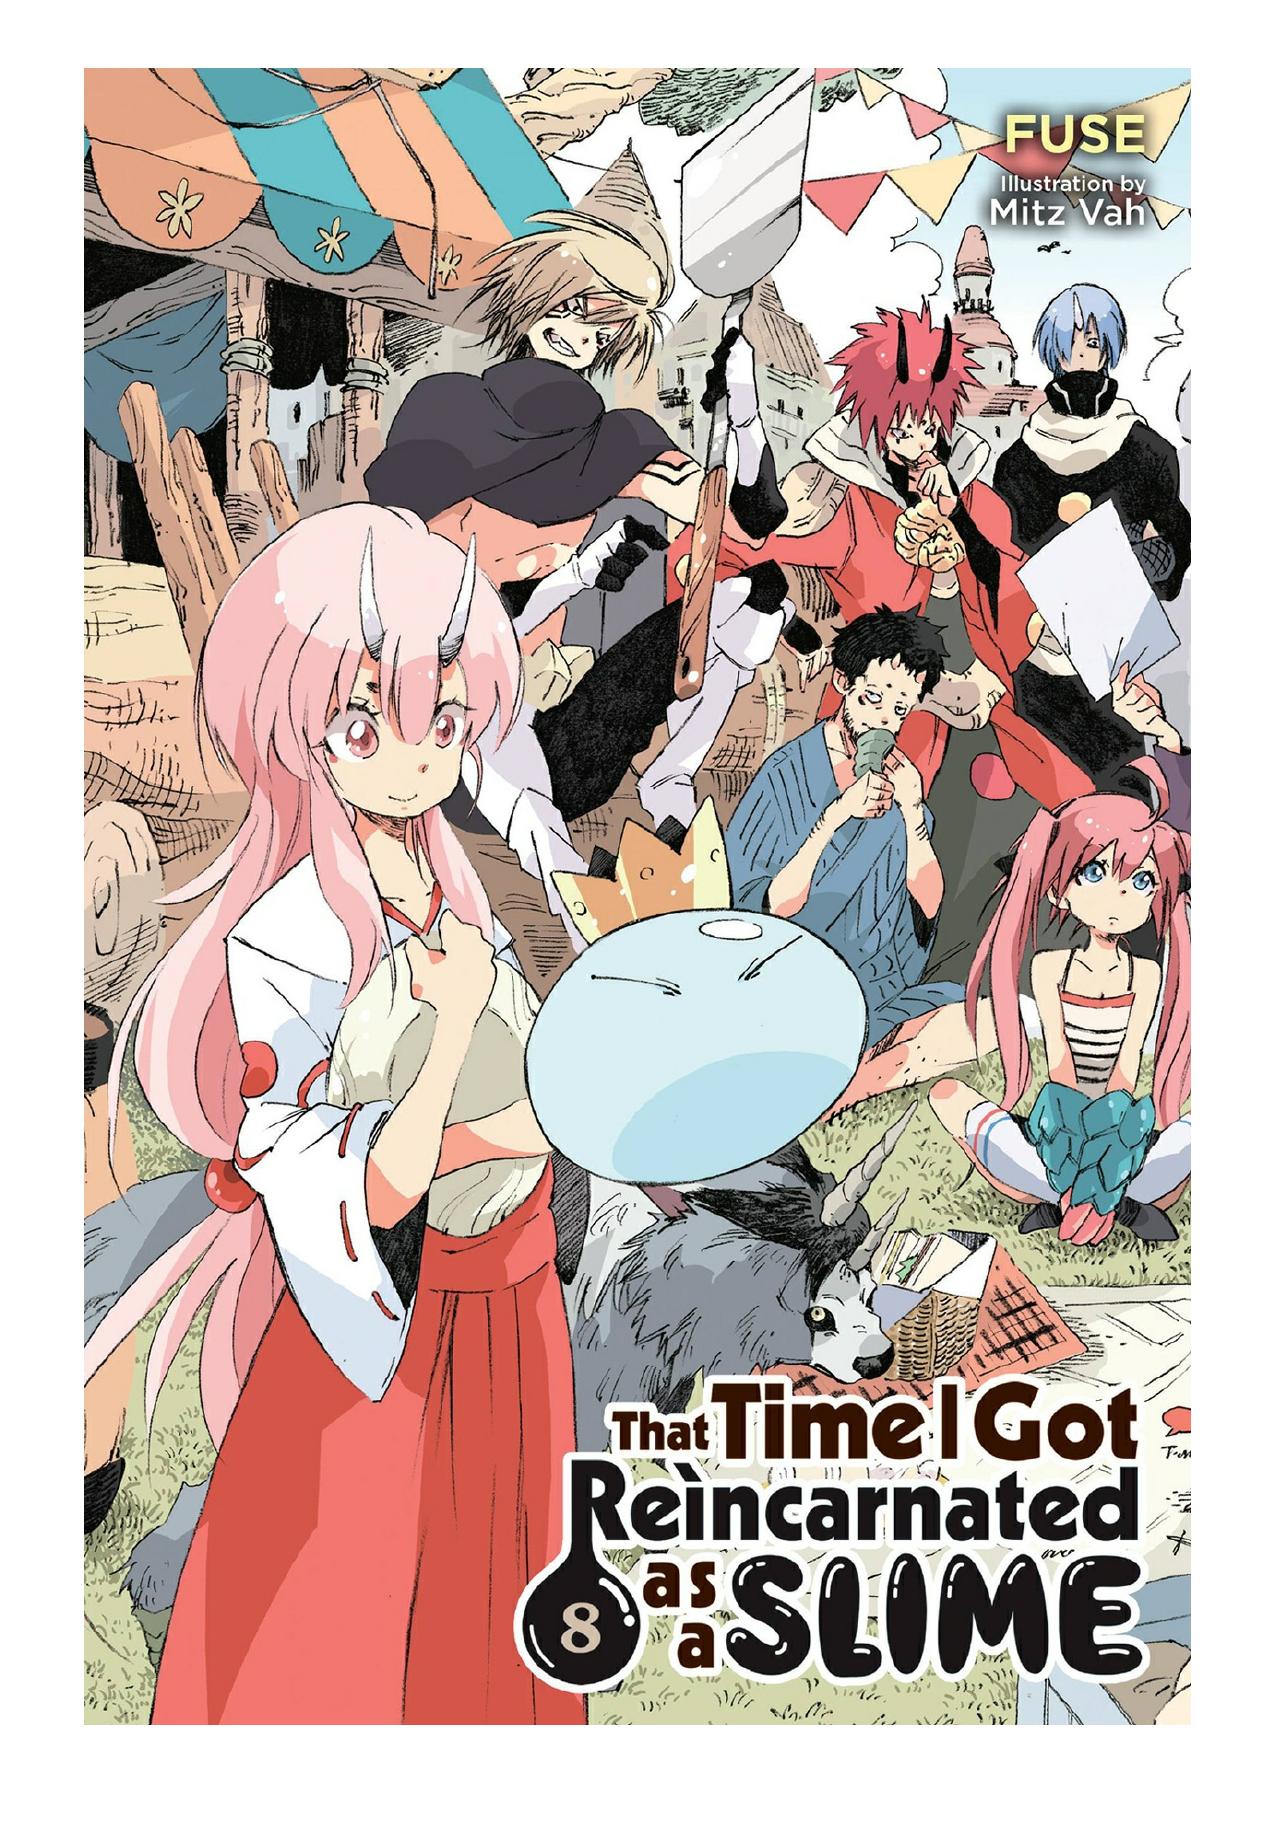 That Time I Got Reincarnated as a Slime, Vol. 8 by Fuse & Mitz Vah